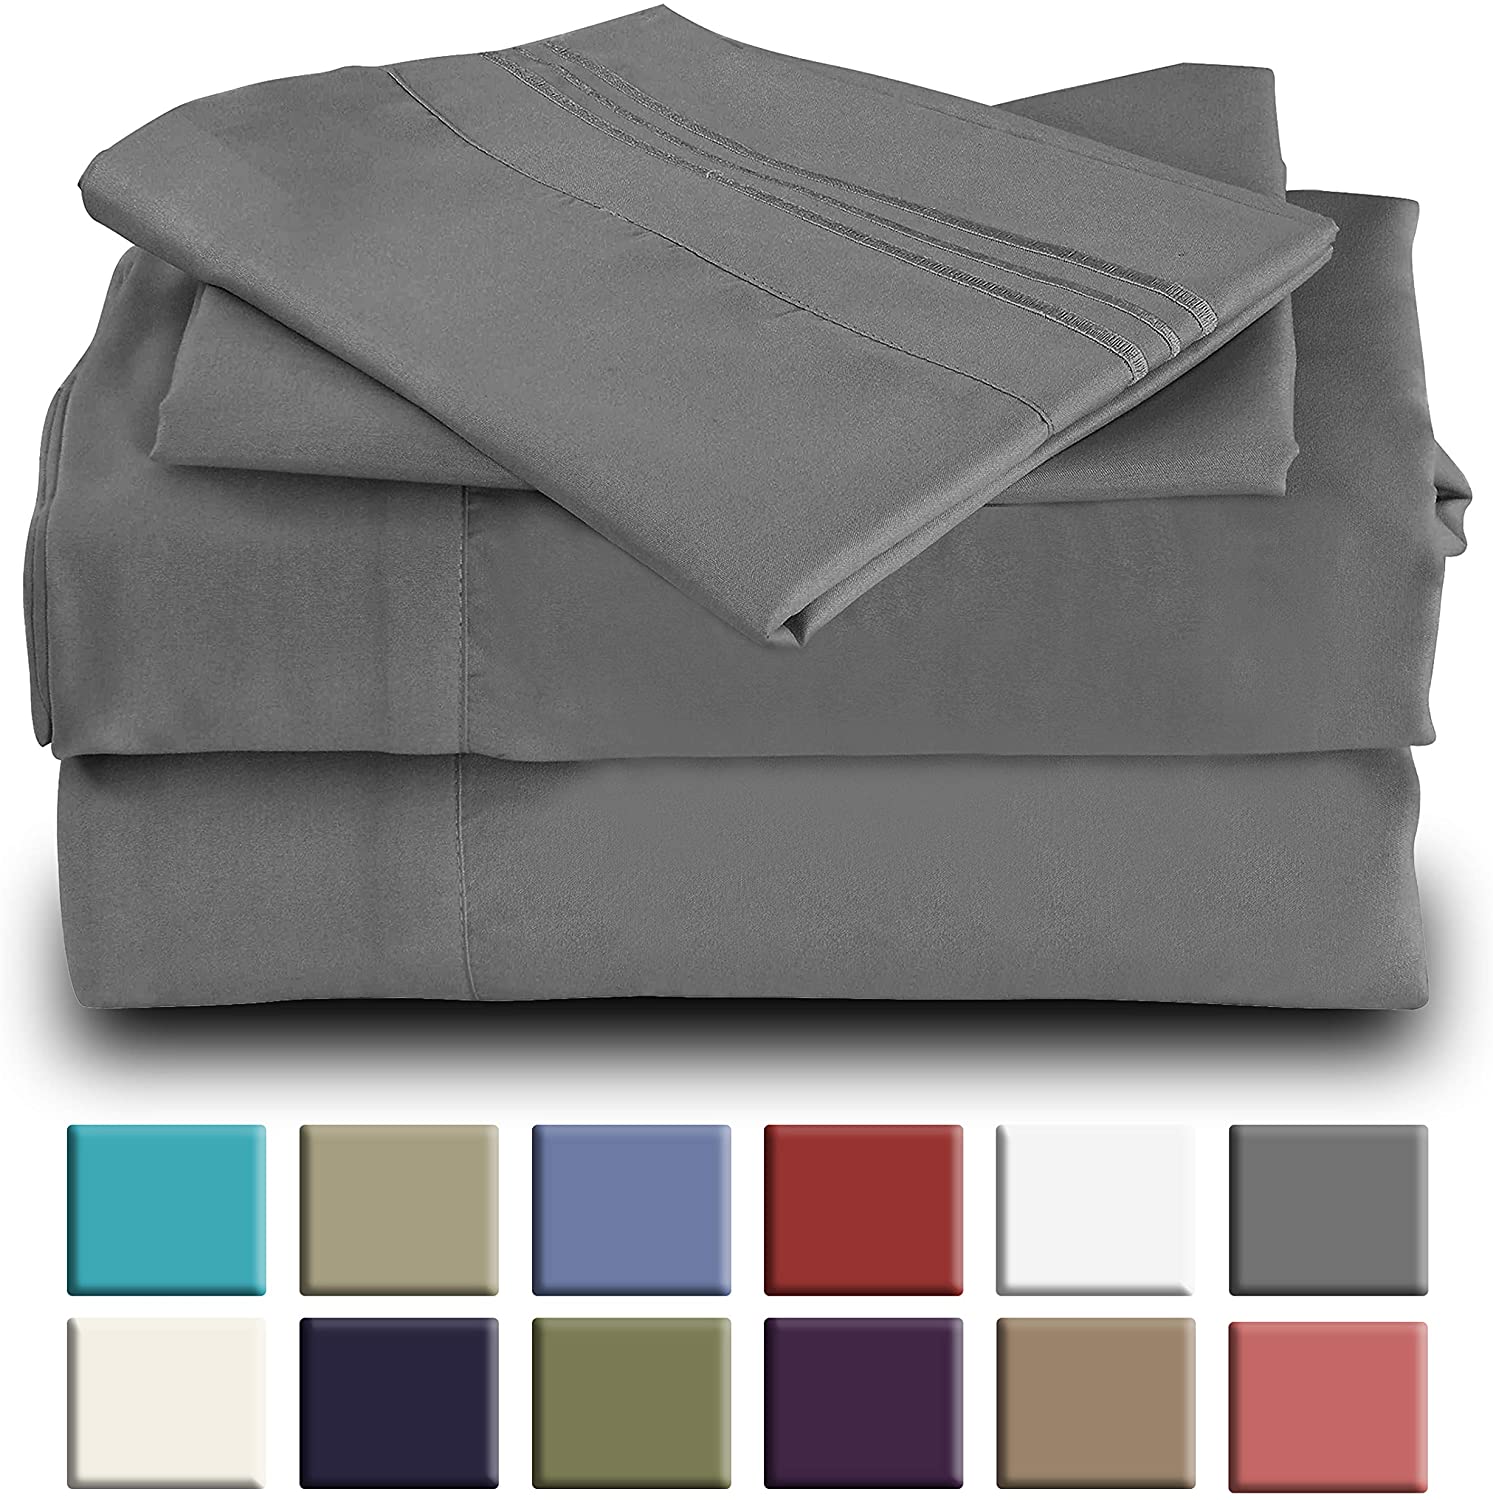 Mutlu Home Goods Rayon Made From Bamboo Sheets Set, Queen Gray Sheets -Deep Pockets-Available in Queen,King,Full,California King,Twin,Twin XL-Wrinkle Free-Ultrasoft-4 Pieces, Queen Size, Gray - image 1 of 5